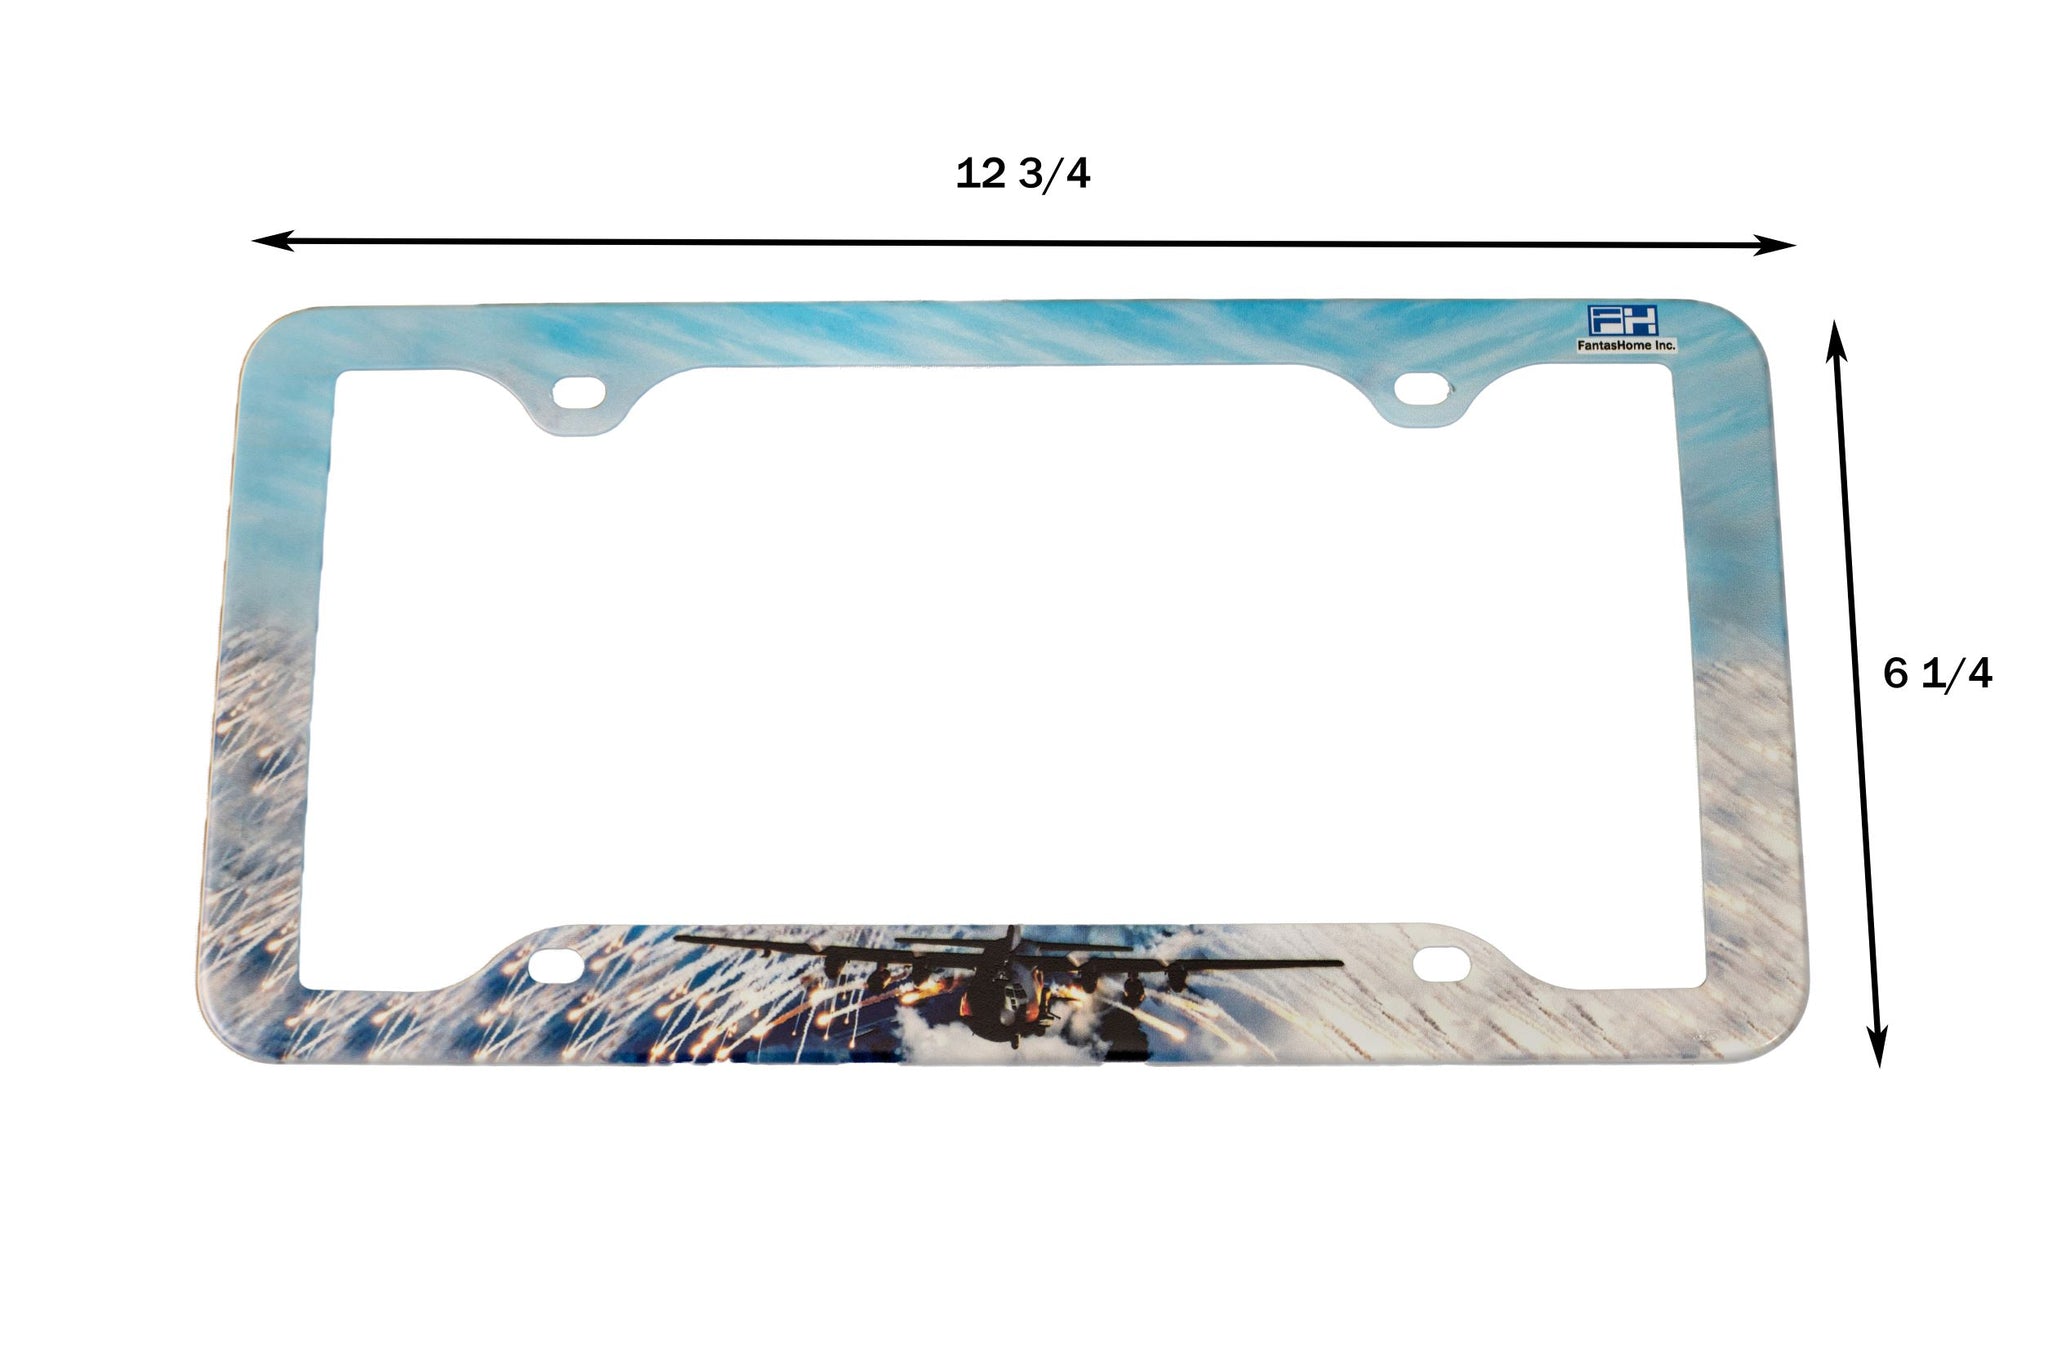 CafePress Fly Fishing License Plate Frame Chrome License Plate Frame,  License Tag Holder